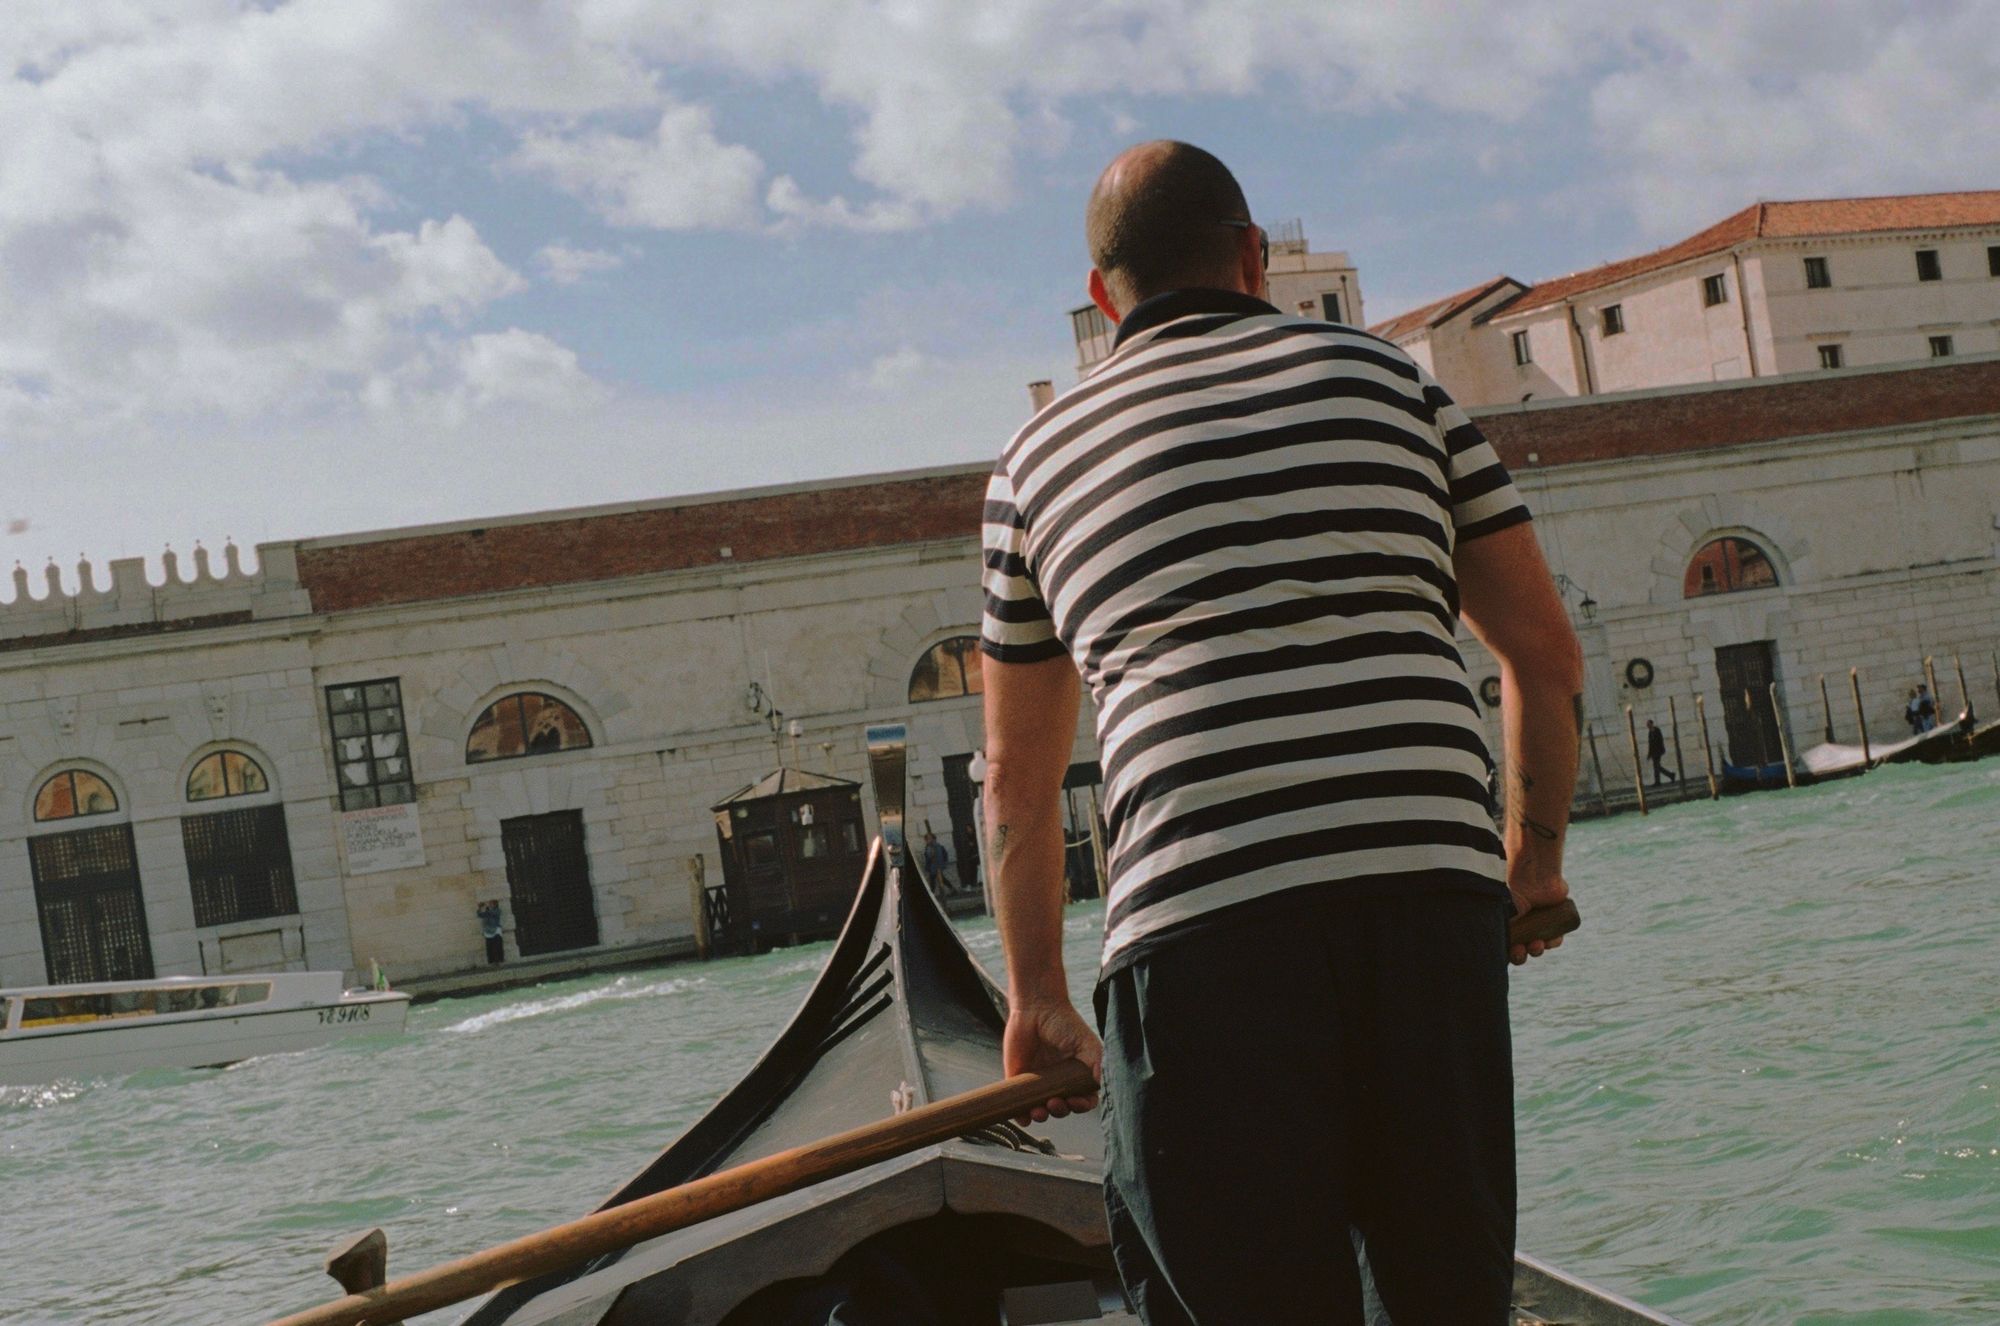 A heavy-set, middle-aged gondolier with cropped hair and a tattoo, seen from behind, working as a ferryman at the front of a large gondola—he looks to the right as he approaches Salute, making adjustments with his oar.